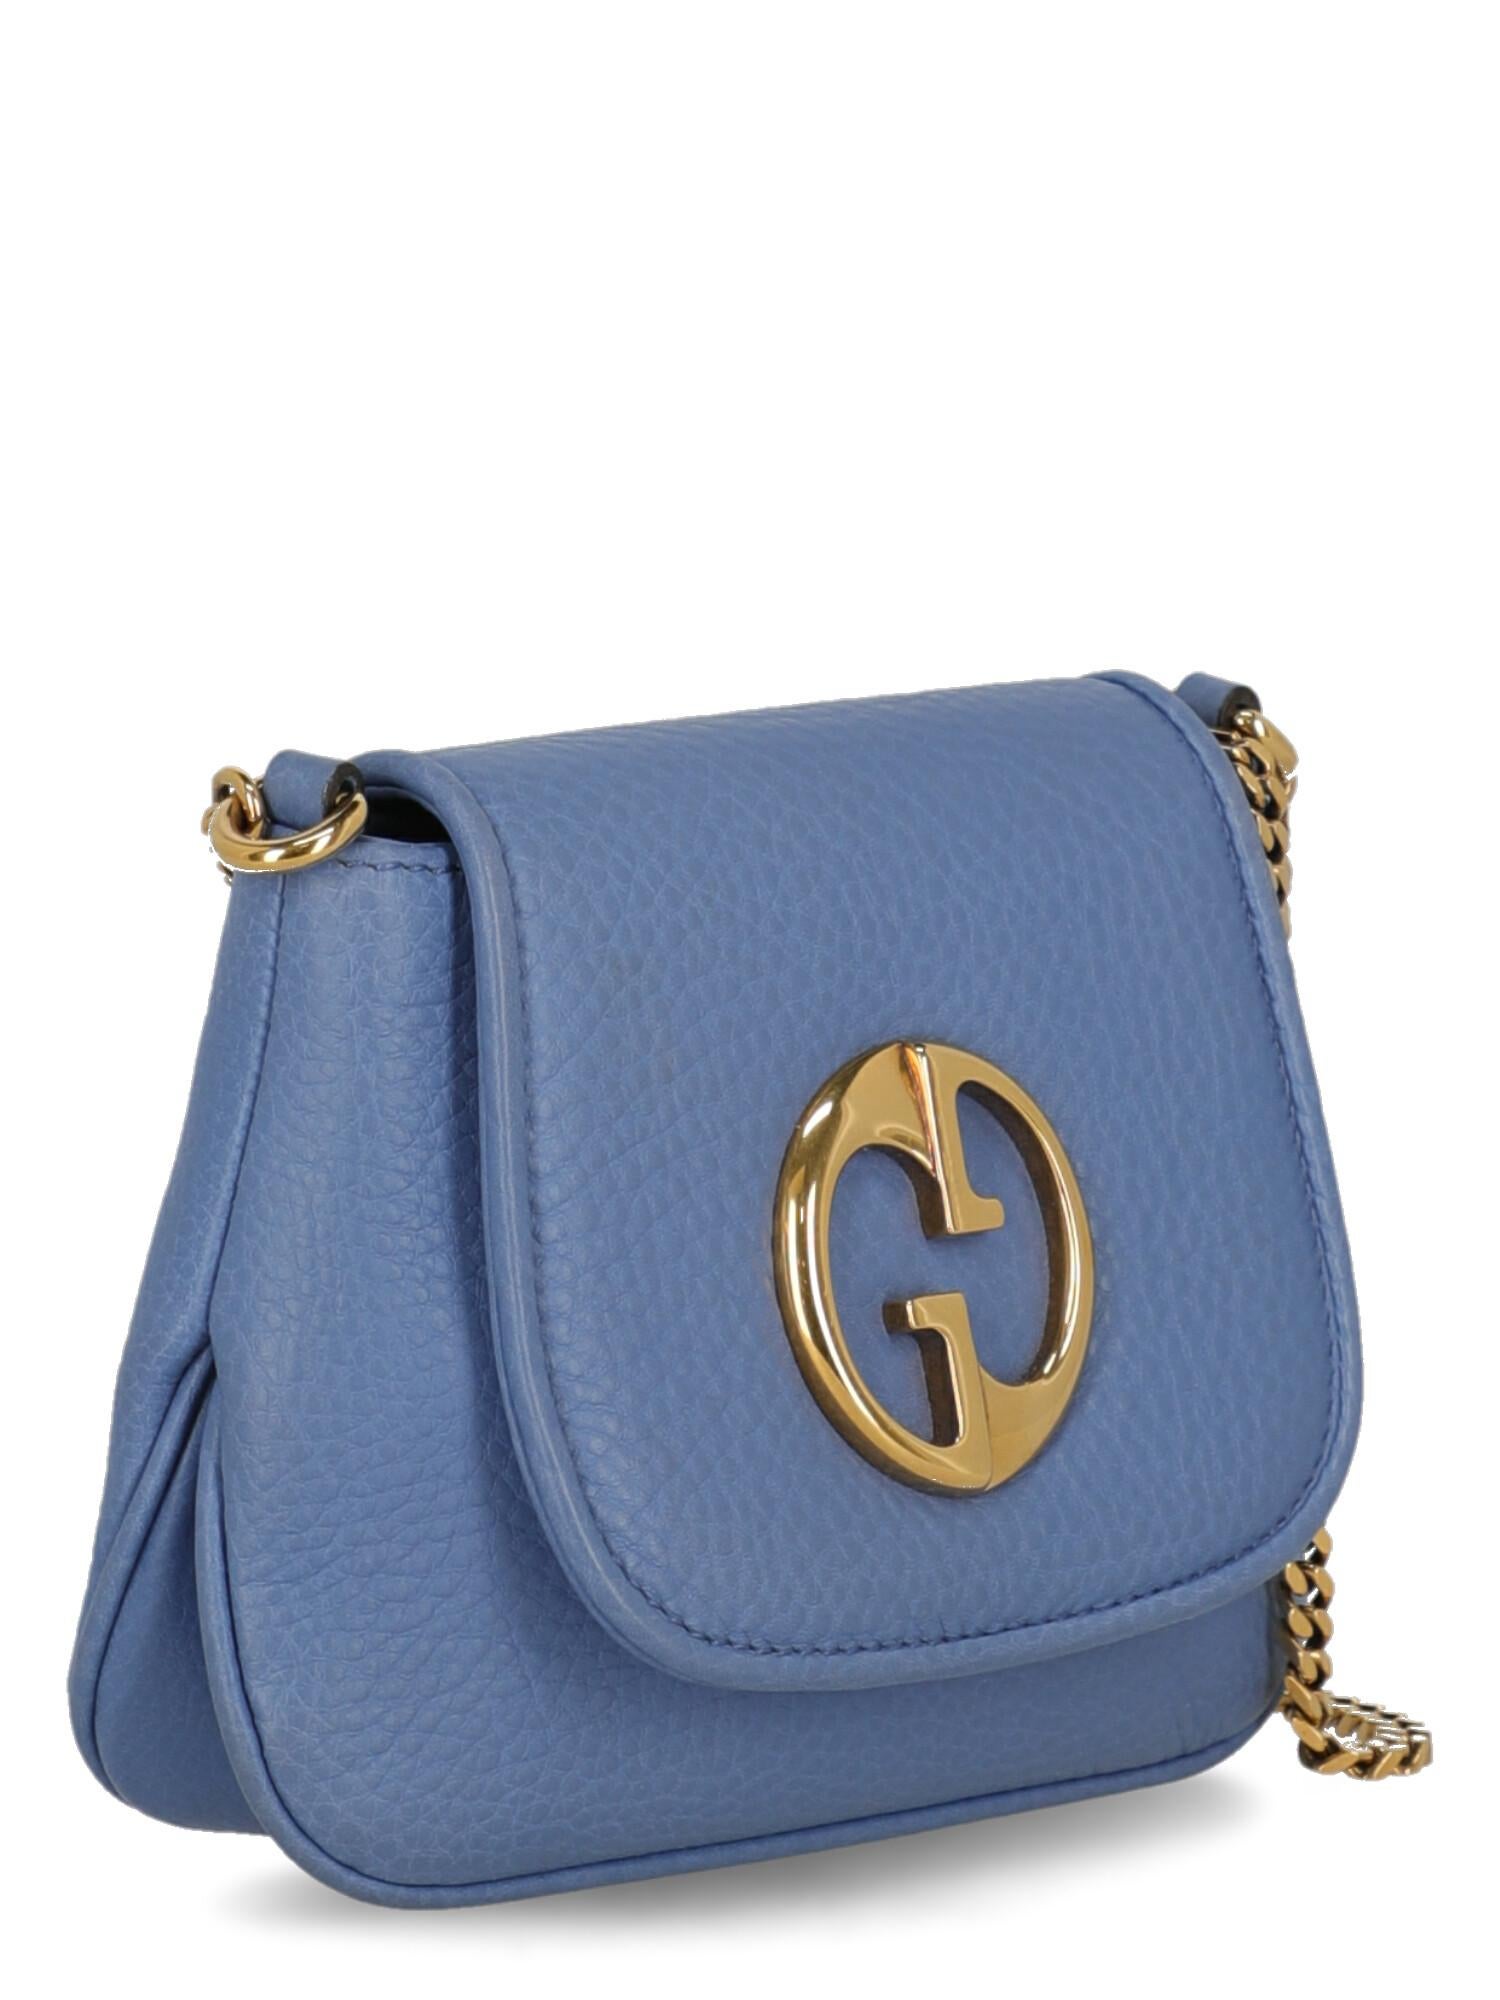 Gray Gucci  Women   Shoulder bags  1973 Blue Leather 